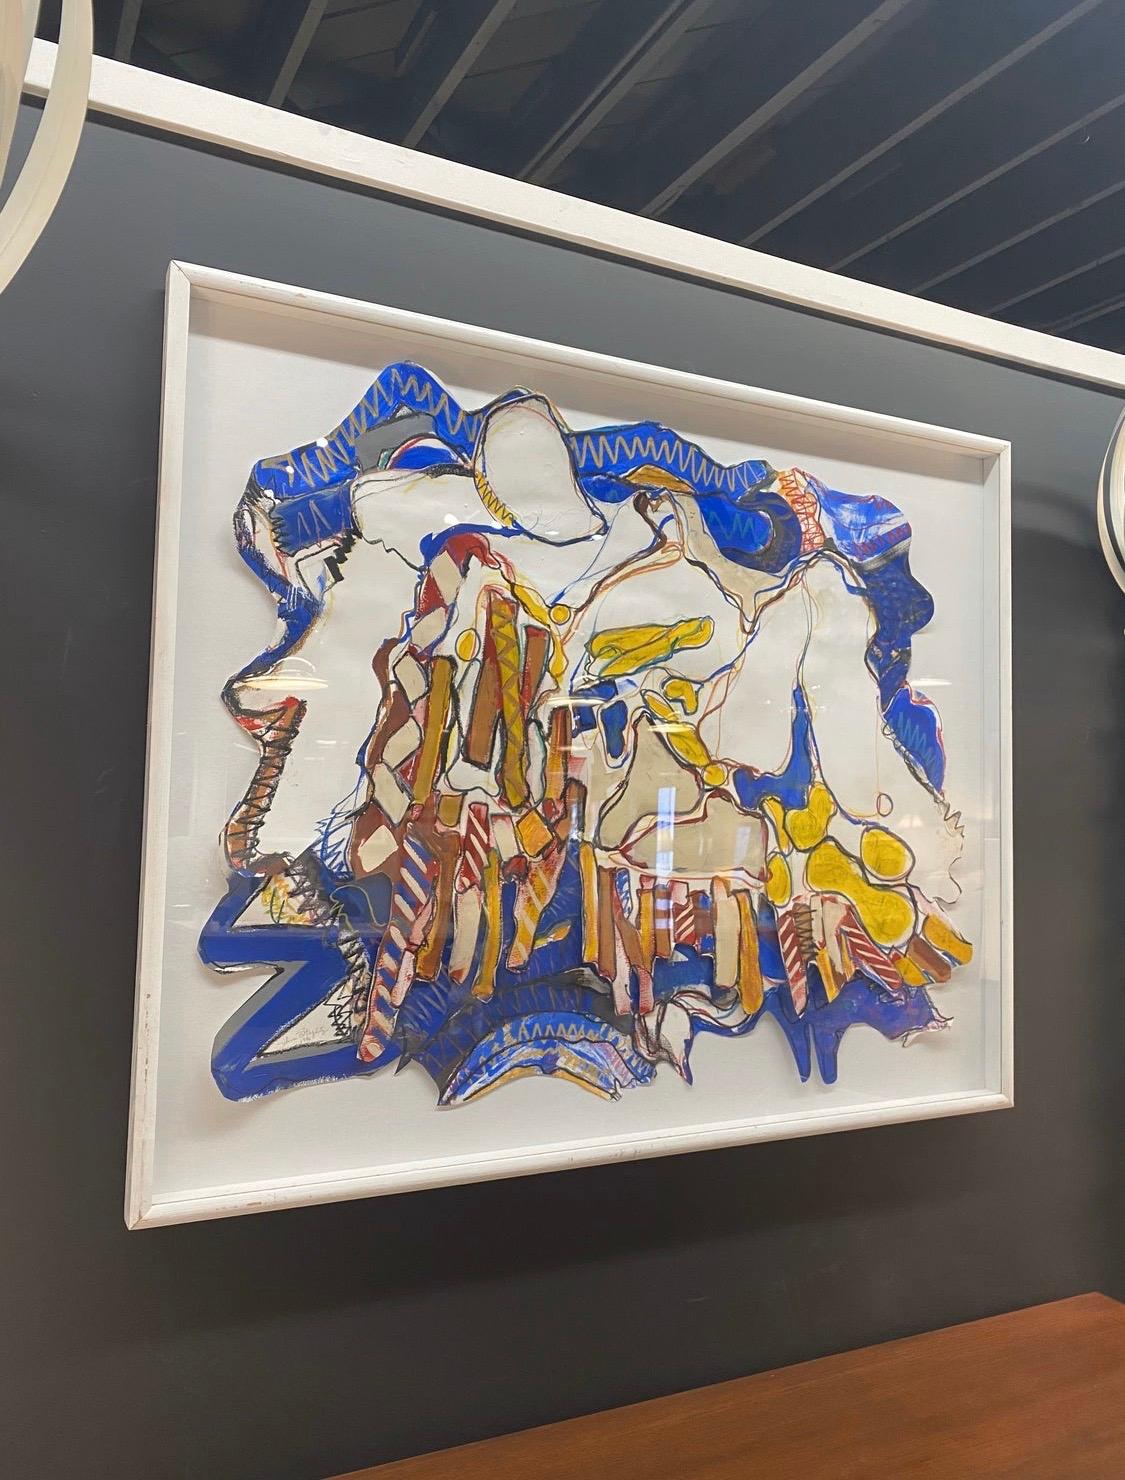 Signed, original Ilene Steglitz framed mixed media work of art dated 1986.
Nothing short of magnificent and one of six we will feature this week from this artist on
1stdibs. This is a large piece at 54